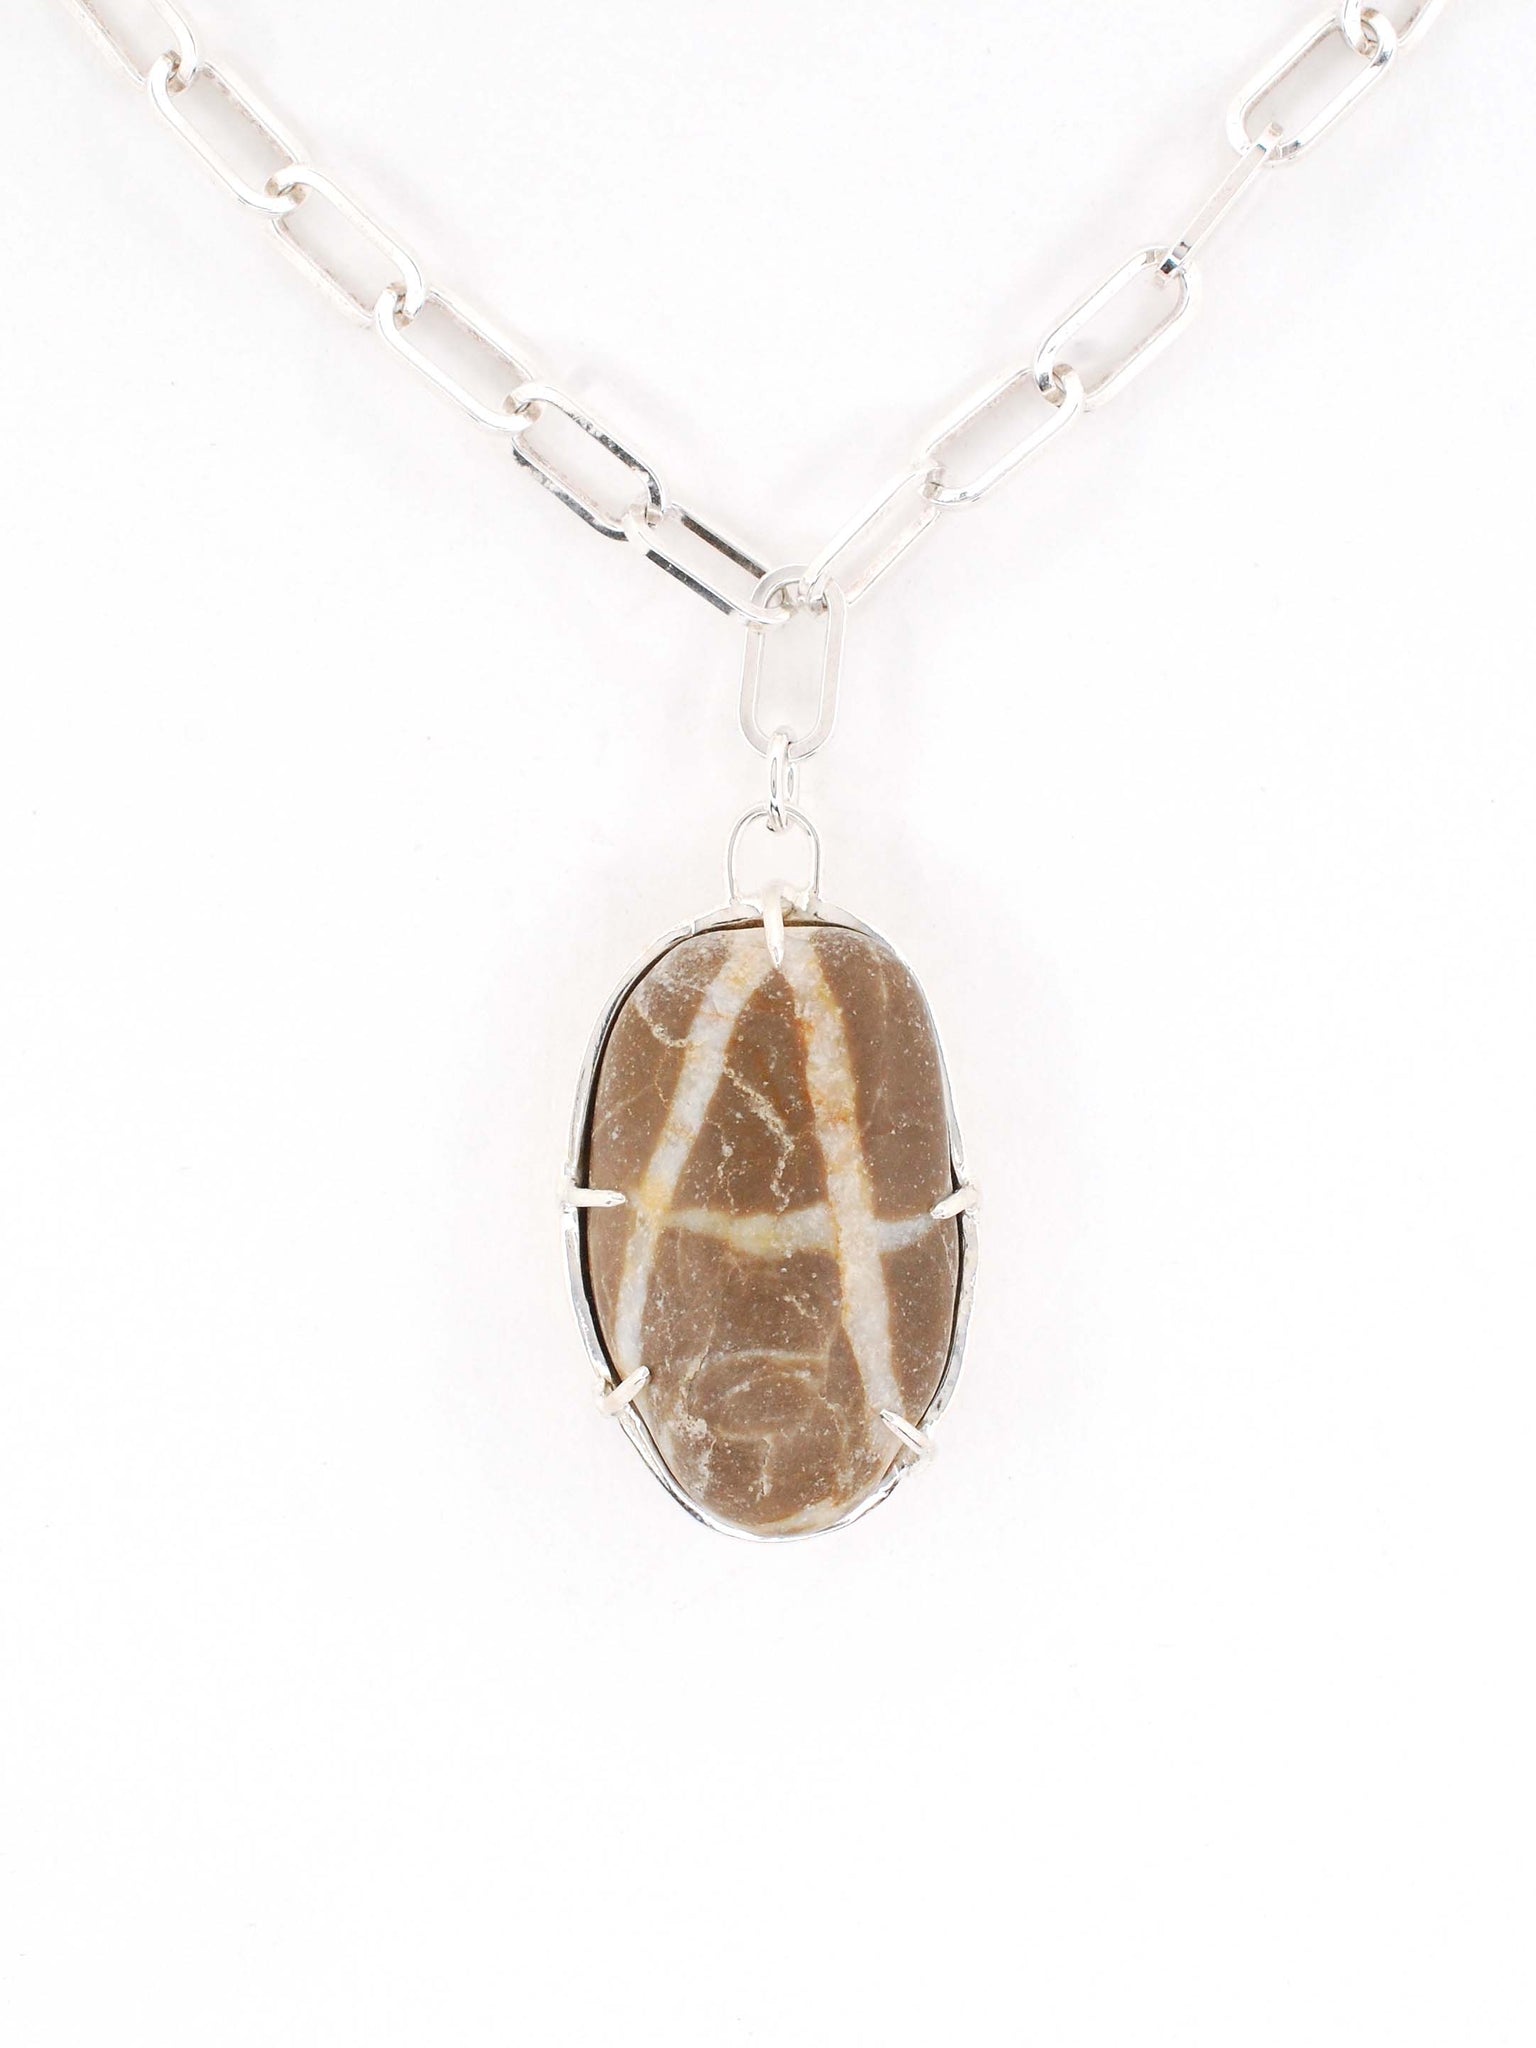 LITHOSPHERE NECKLACE